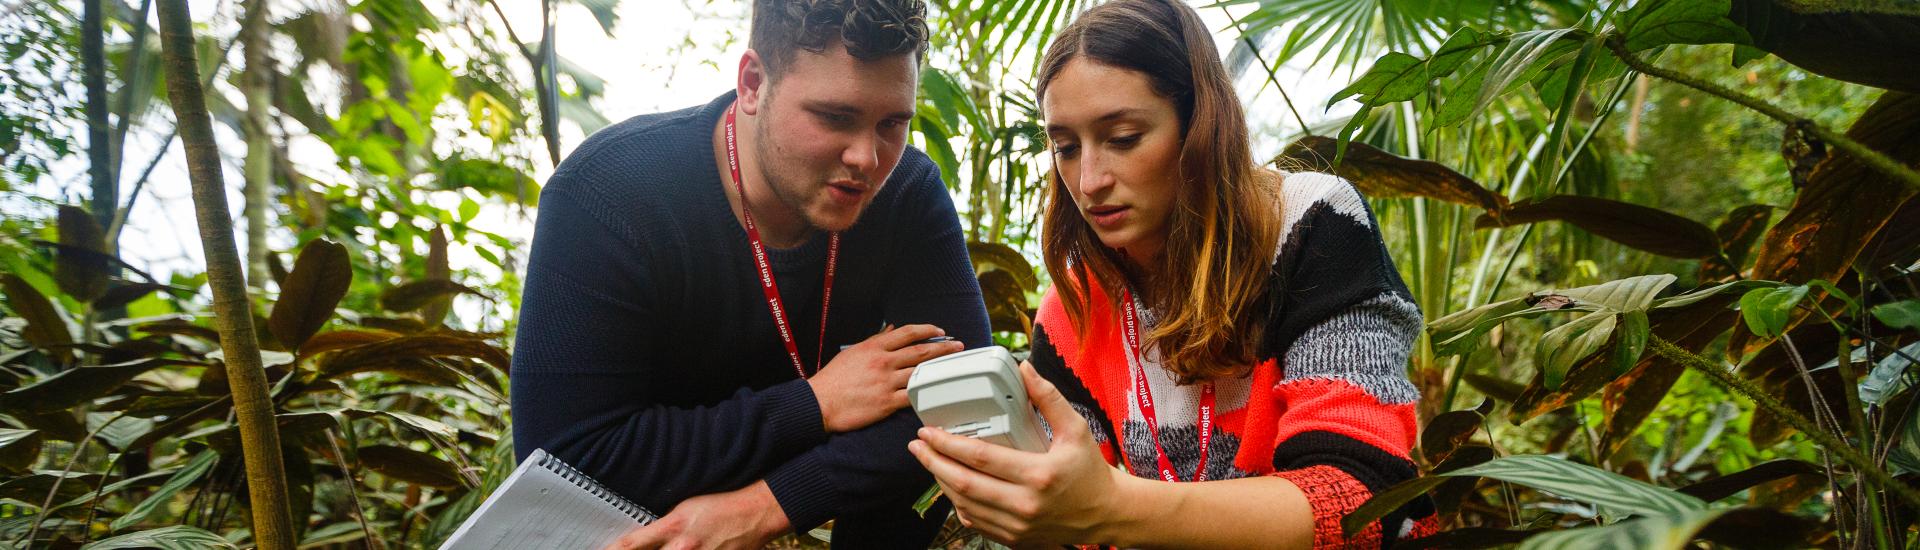 Horticulture students in the Rainforest Biome conducting a science experiment